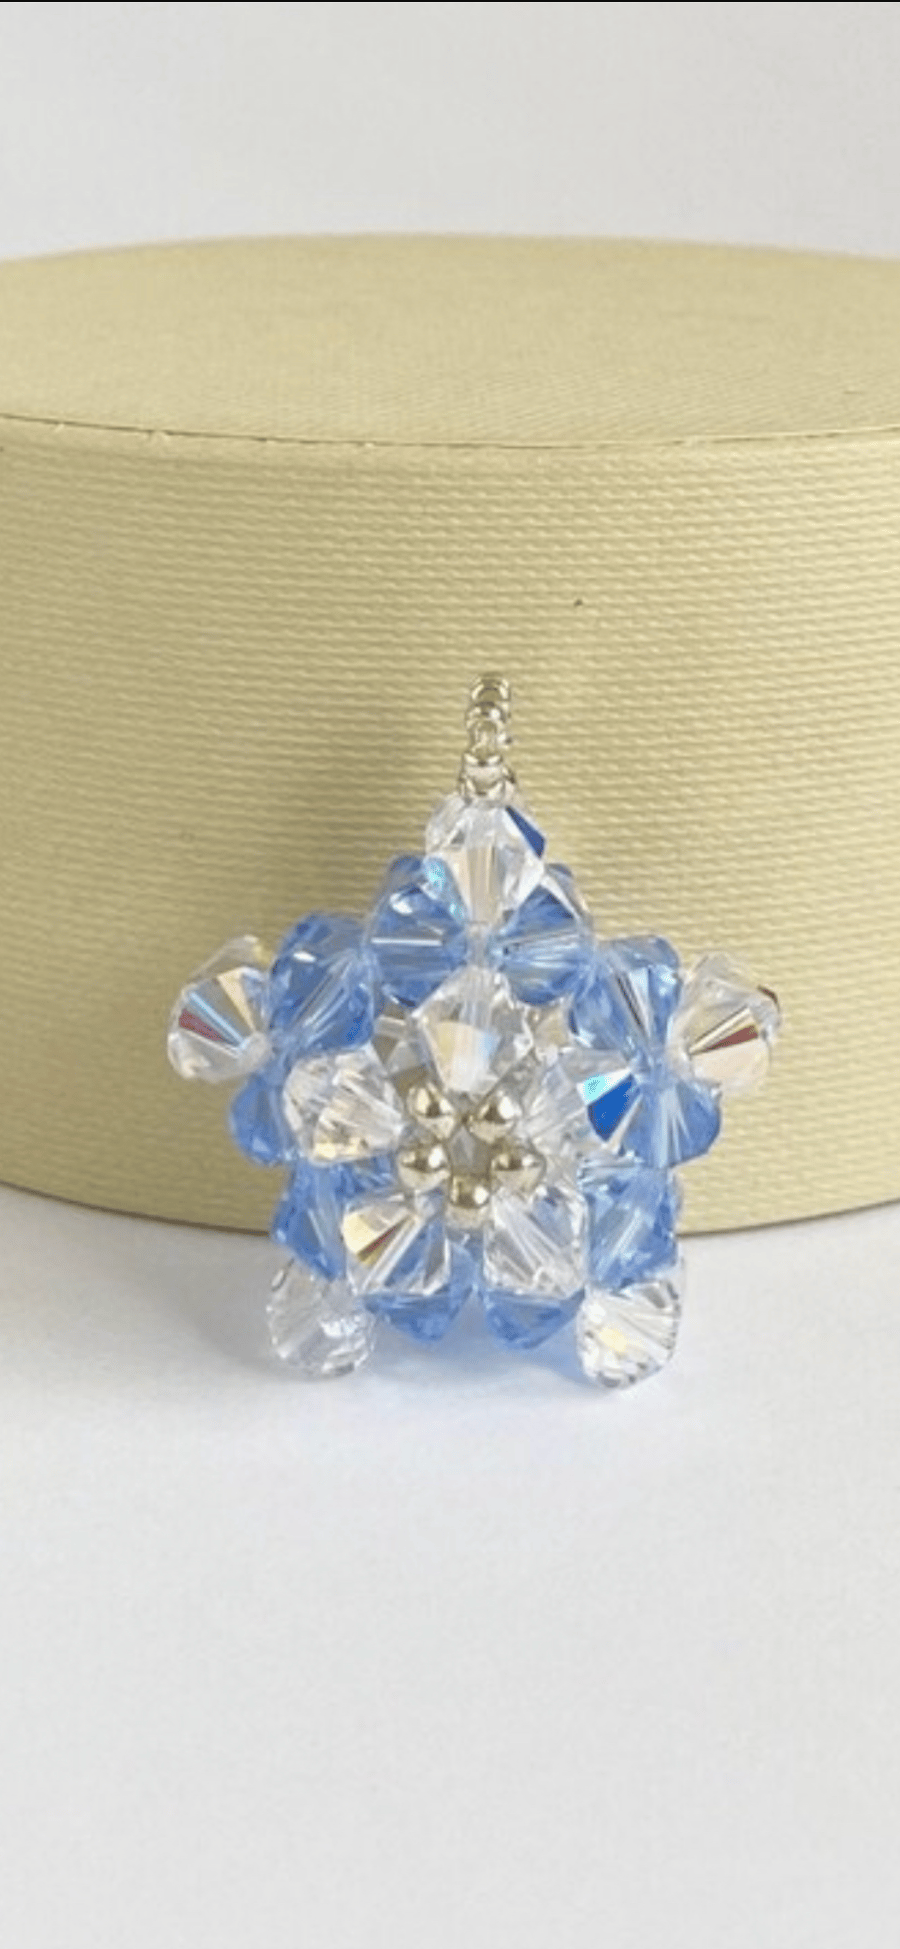 Handbag Charm, Light Sapphire Crystal Star, with a Chainmaille Chain and Keyring